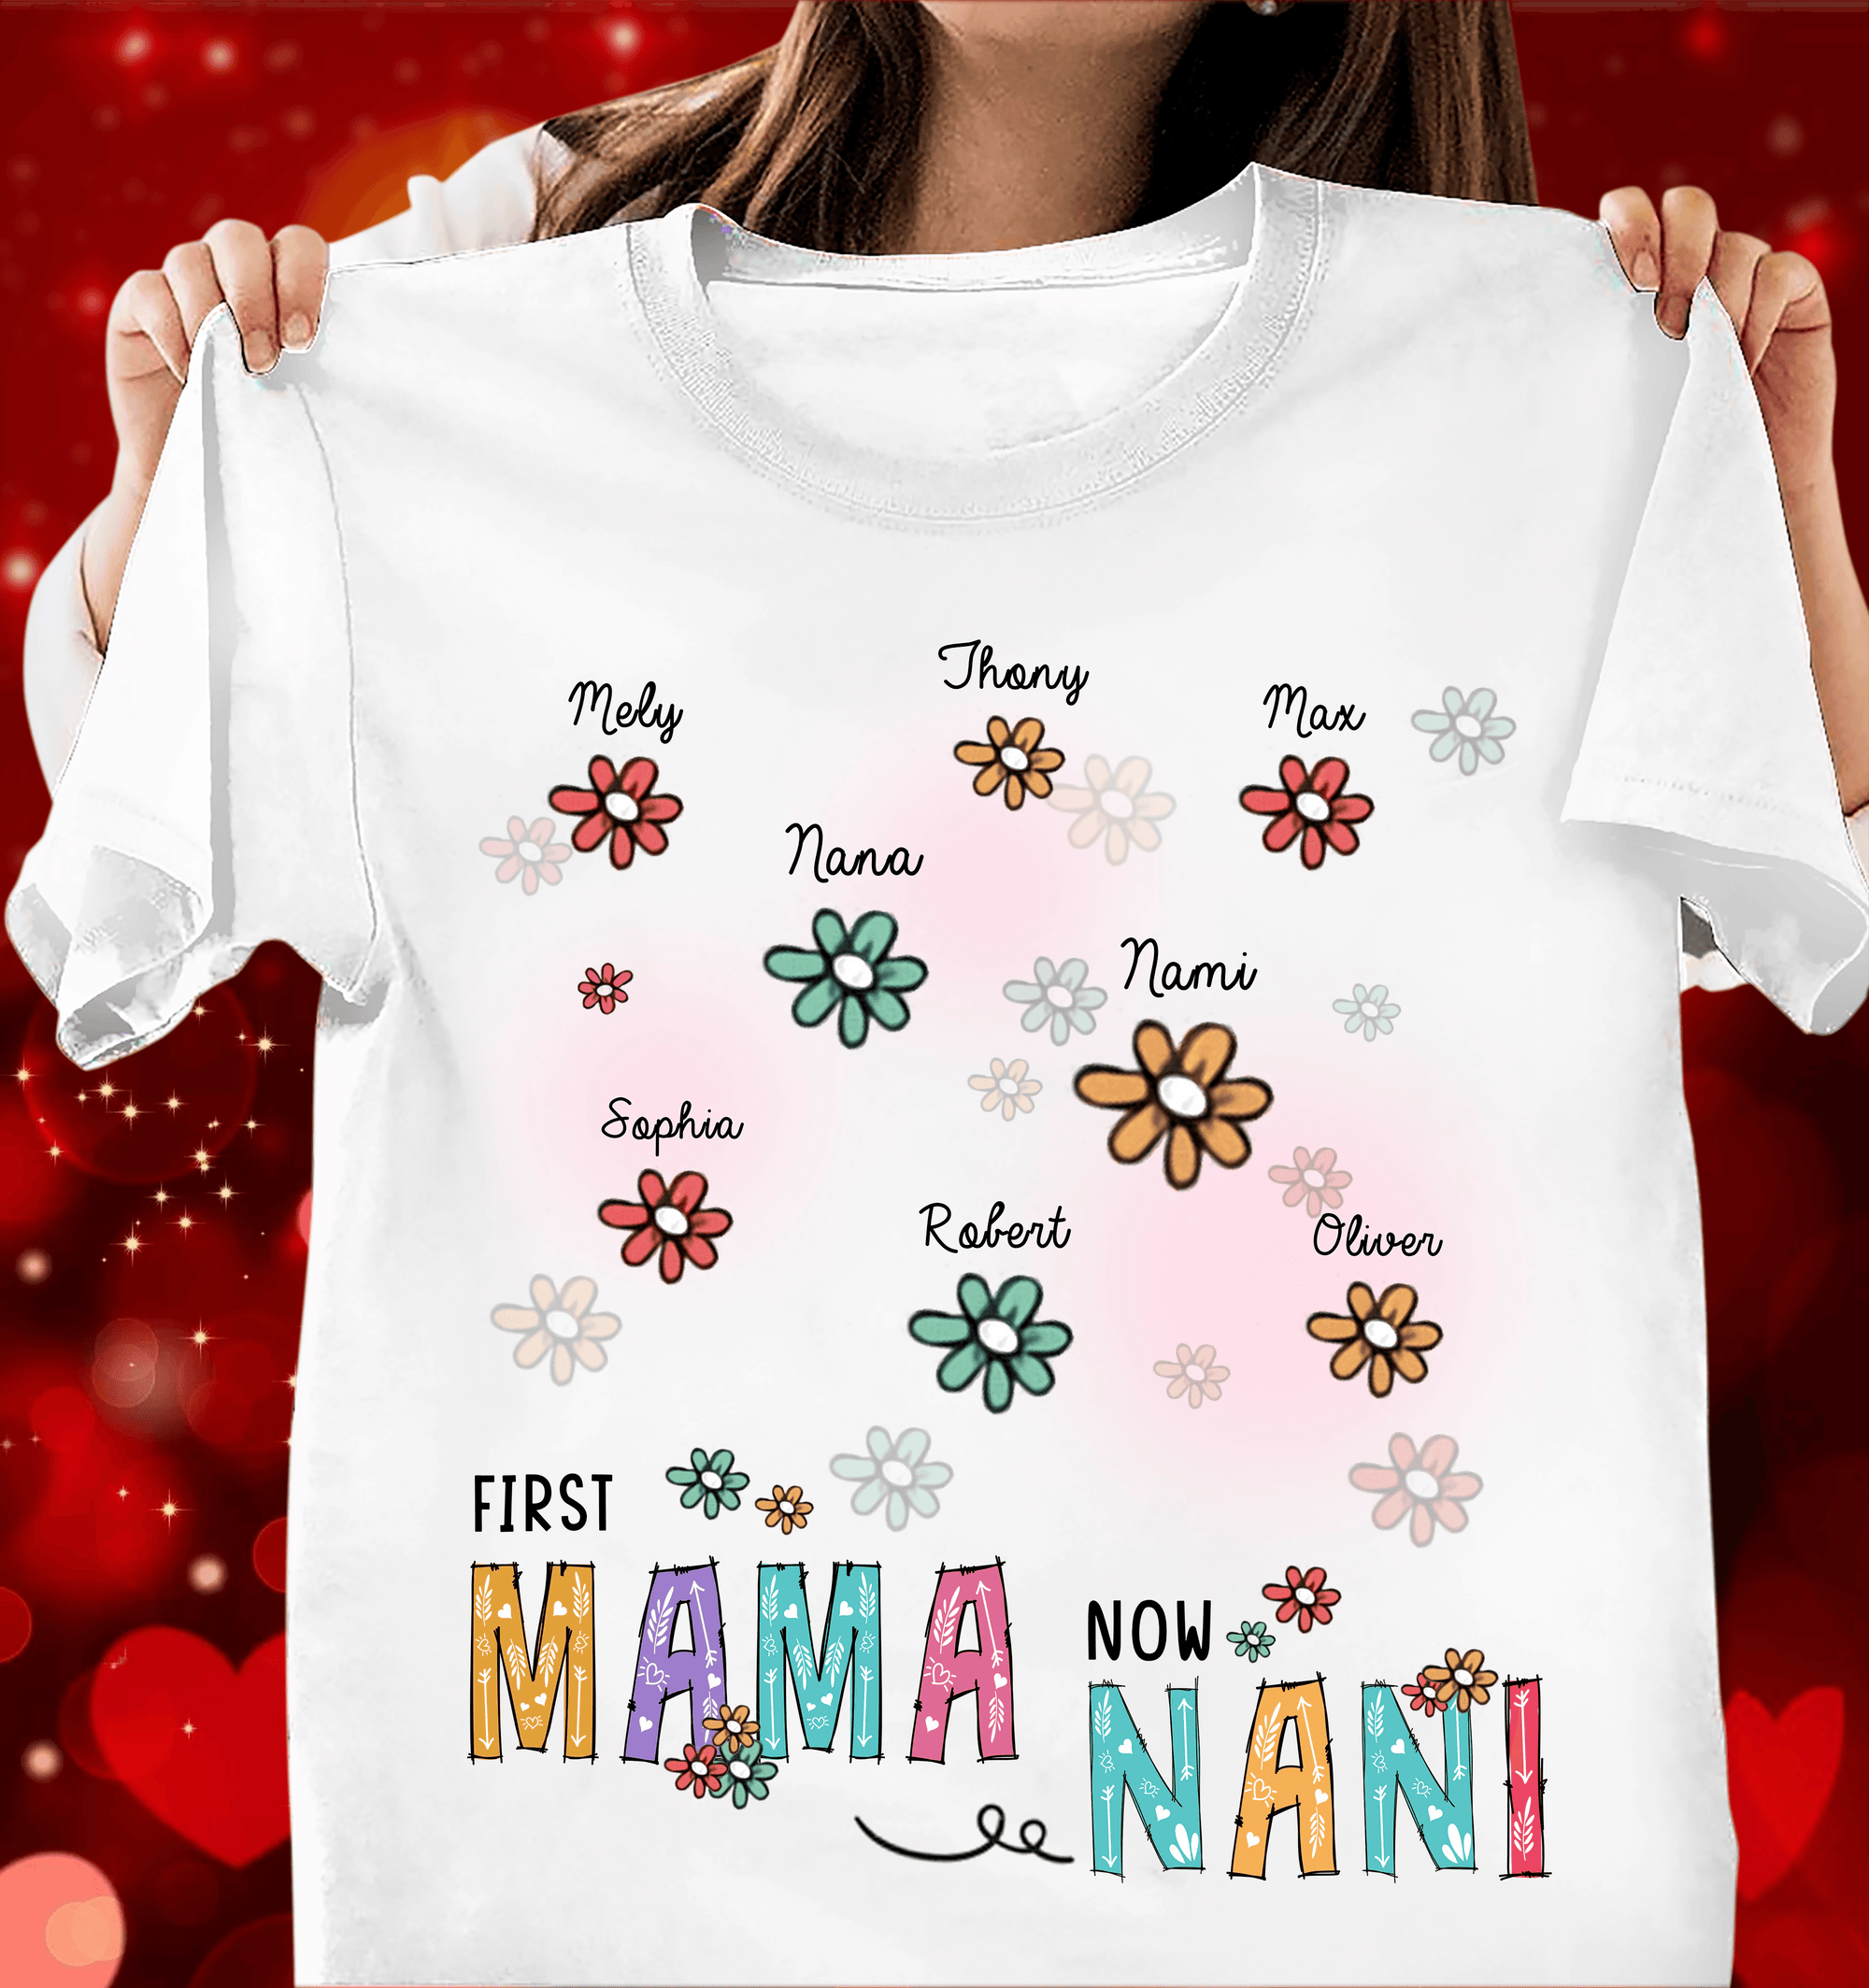 gift for mother mother first mama now nani personalized shirt personalized gift for mom mama parents mother grandmother ts045ps07 bmgifts 2